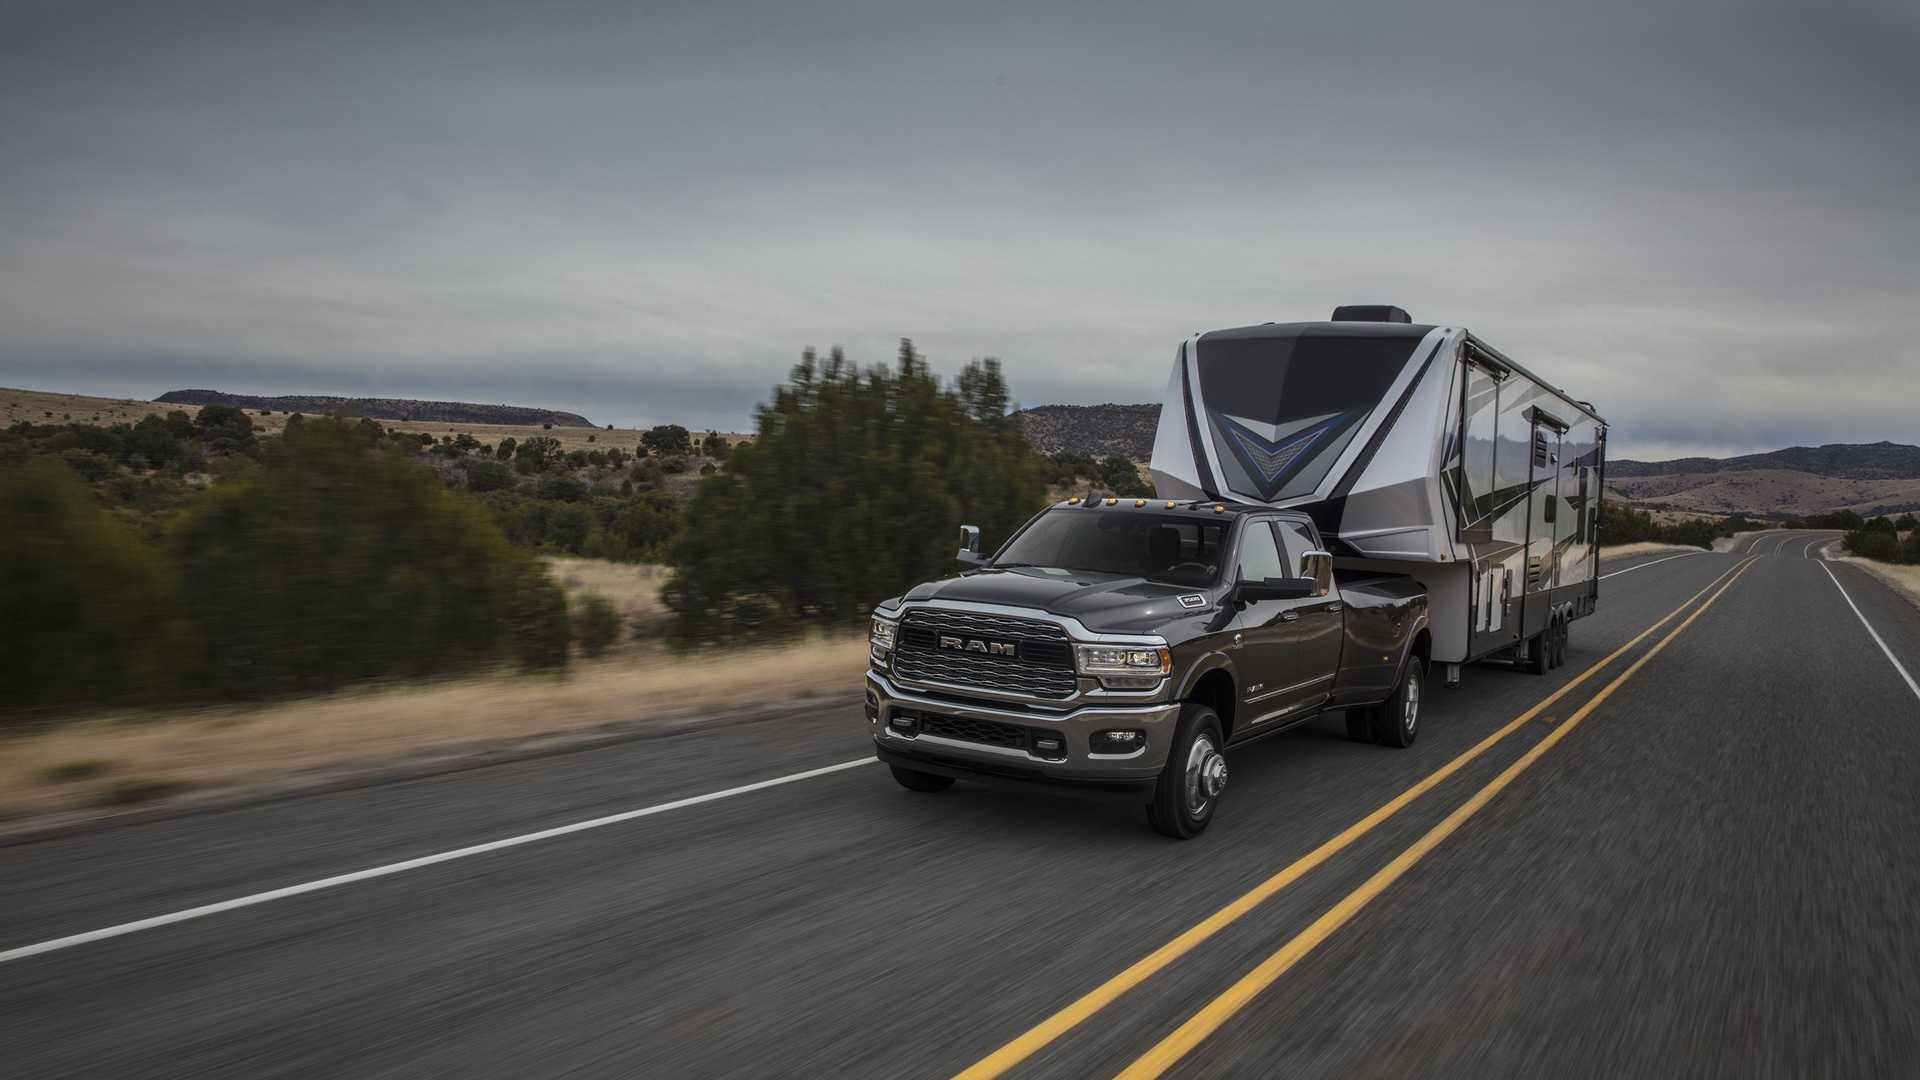 2019 Ram 2500 Heavy Duty Front Three-Quarter Wallpapers #12 of 36